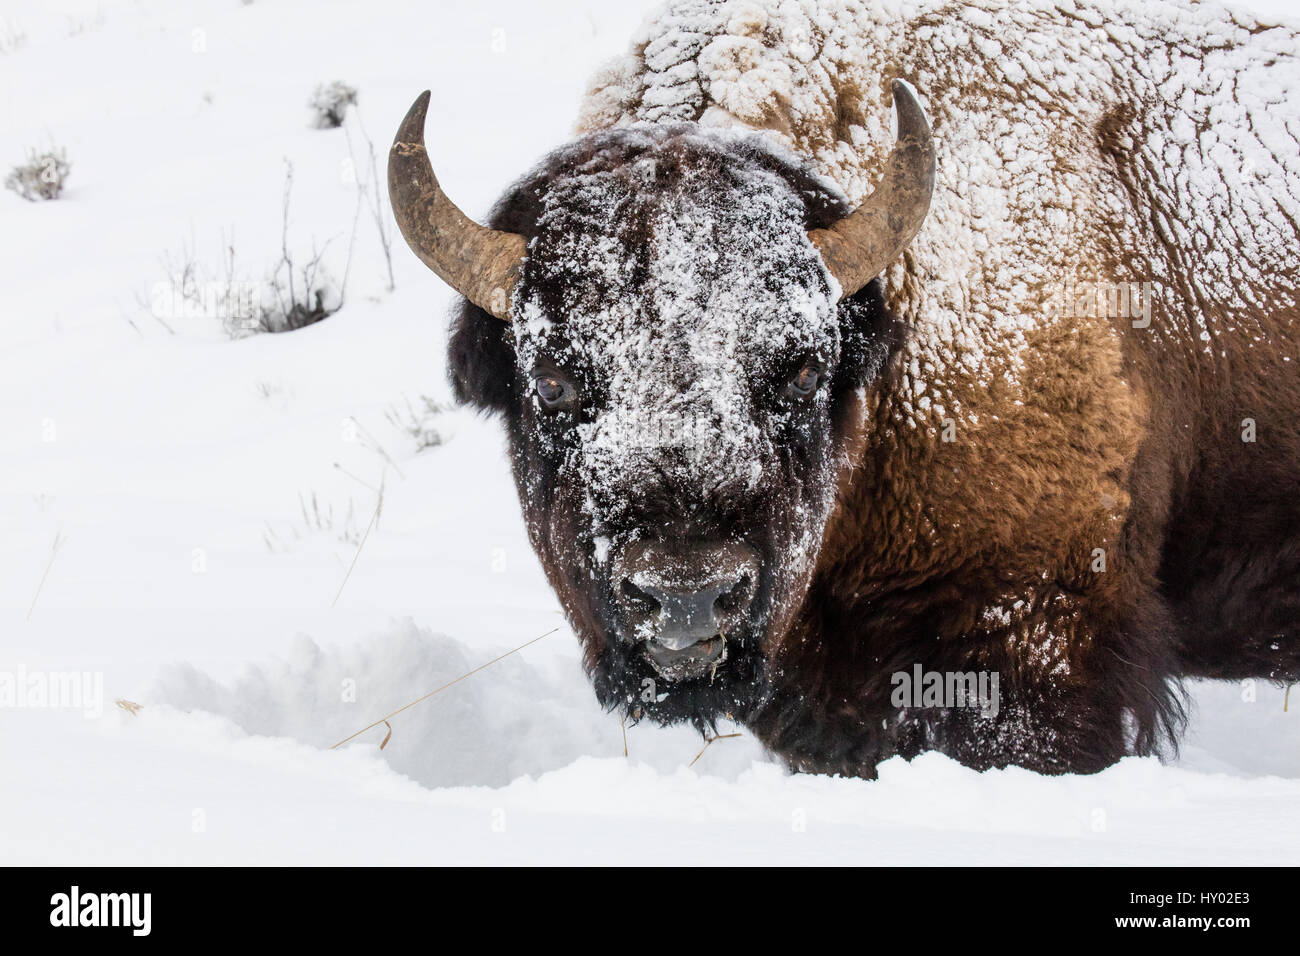 Bison (Bison bison) standing in winter, covered in snow, Yellowstone, USA. January. Stock Photo